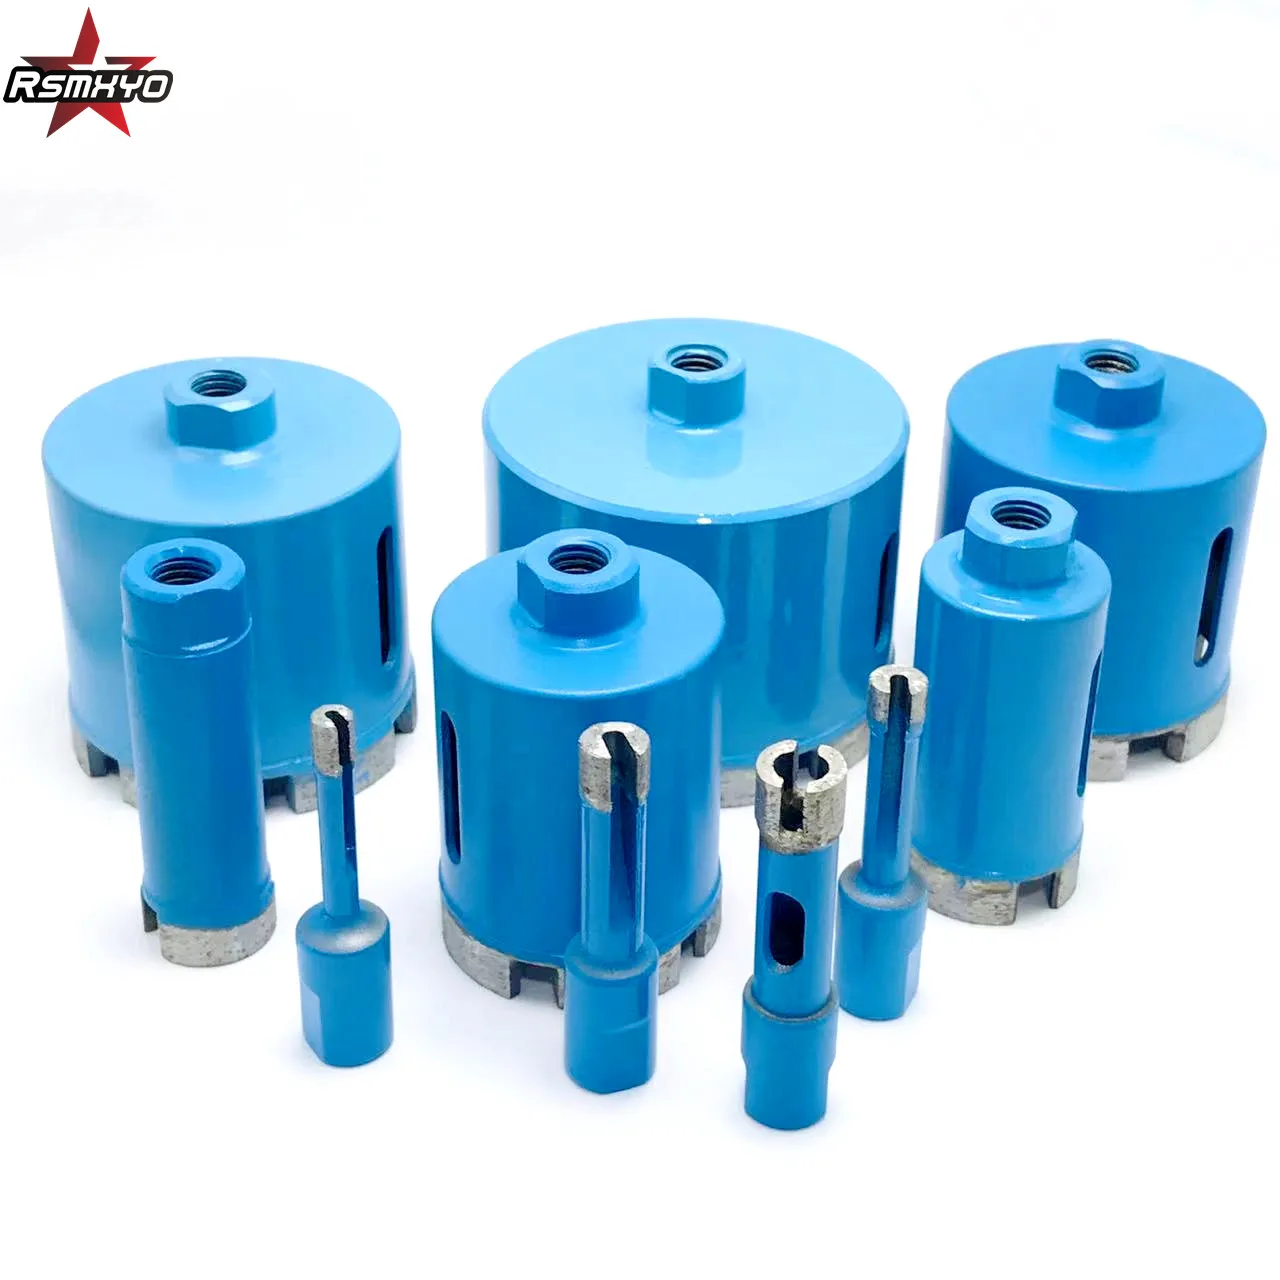 1pcs M10 Angle Grinder 6-75mm Blue Diamond Drill Cutter Saw Core Drill Bit Hole Opener For Marble Granite Tile Ceramic Concrete 1pc 6 120 mm m14 shank hole saw angle grinder diamond core bits marble opener for drilling granite glass ceramic tile concrete